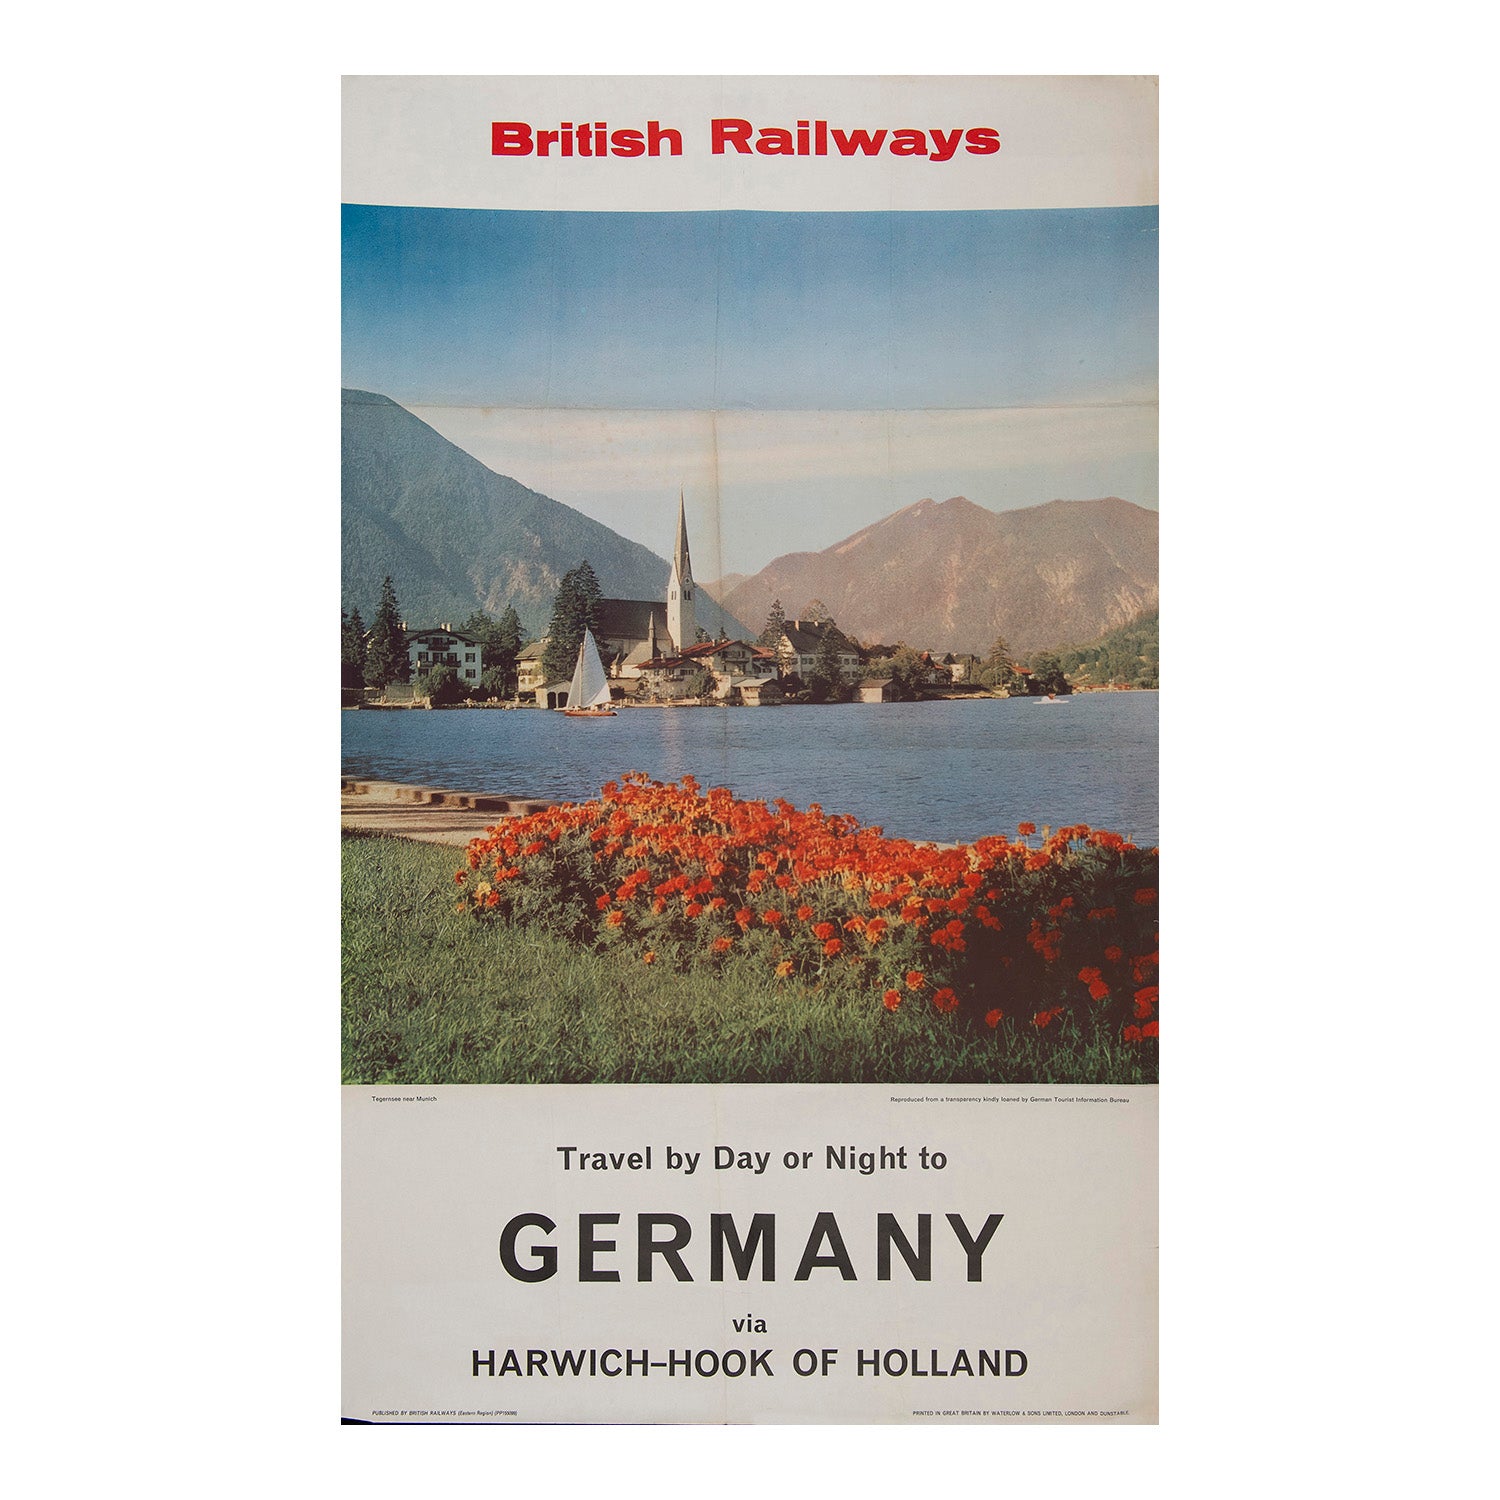 British Railways (Eastern Region) photographic poster promoting travel to Germany via Harwich-Hook of Holland, c. 1965. The photograph (supplied by the German Tourist Board) shows the spa town of Tegernsee, in the Bavarian Alps